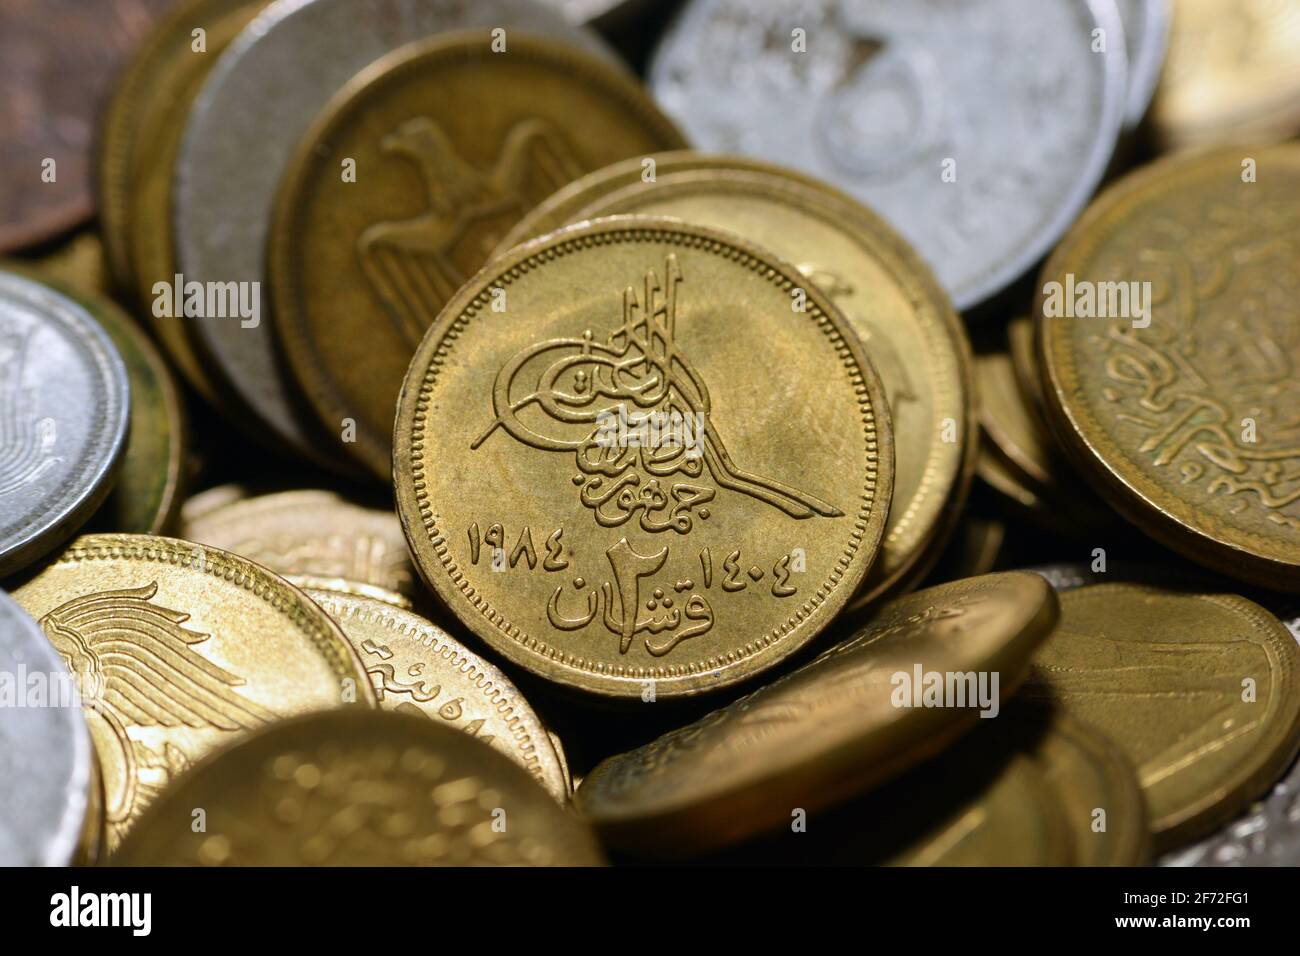 two Egyptian piasters coin 1984 (observe side of the coin), old Egyptian money of 2 piasters coin, vintage retro, old Egyptian coins Stock Photo